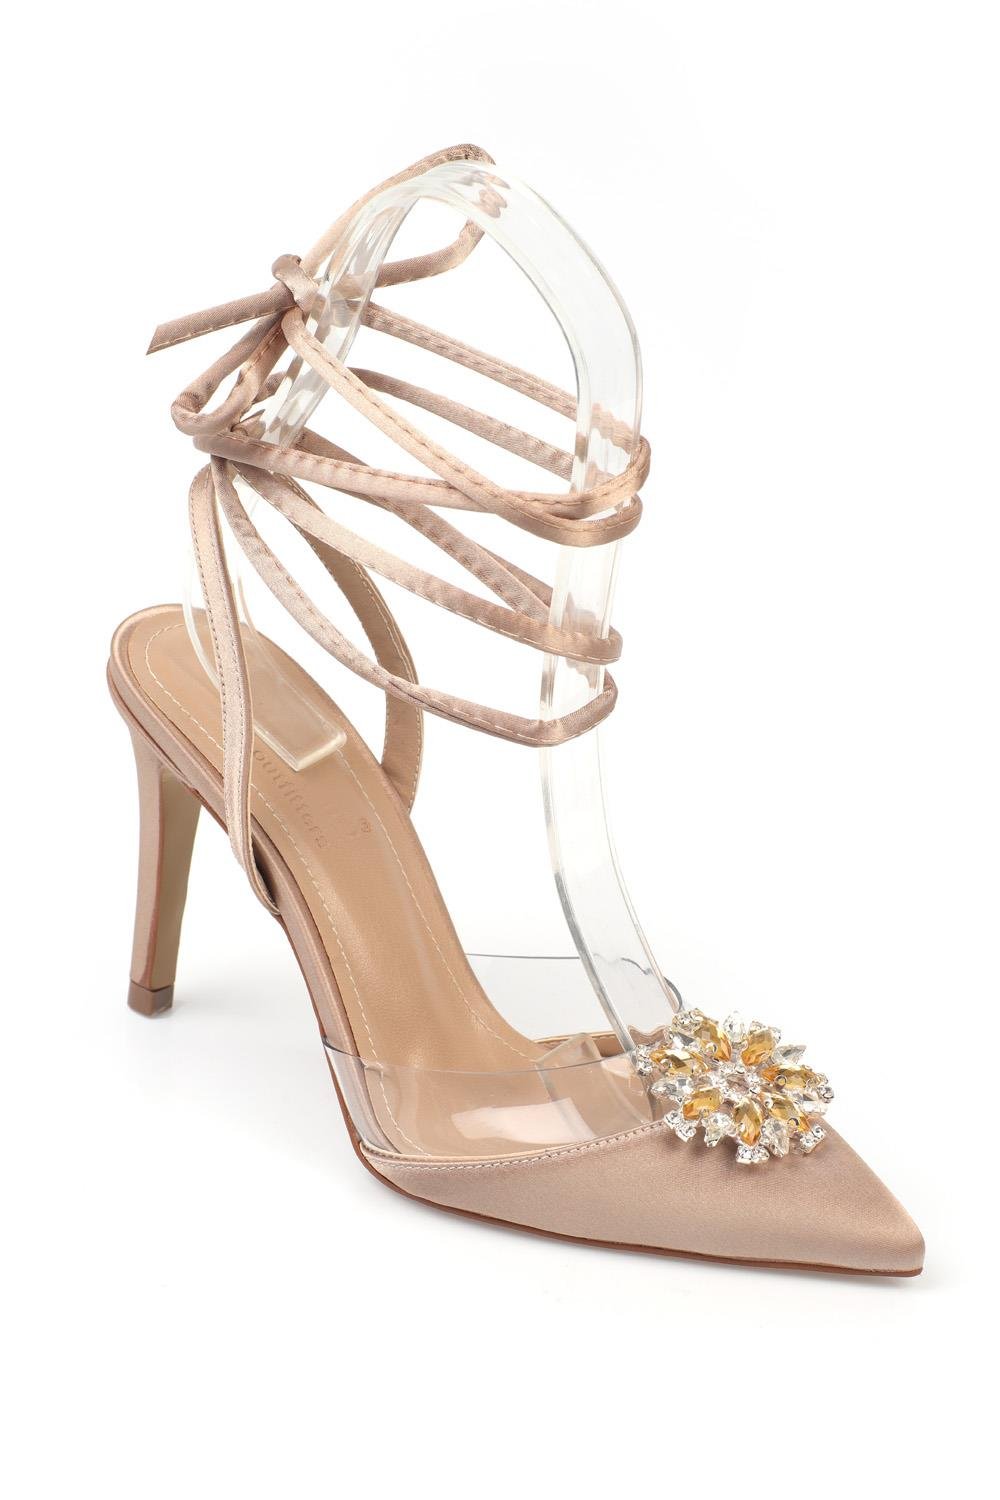 Capone Pointed Toe Translucent Detail Crystal Flower Bouckle Ankle Lace Up Satin  High Heel Woman Shoes